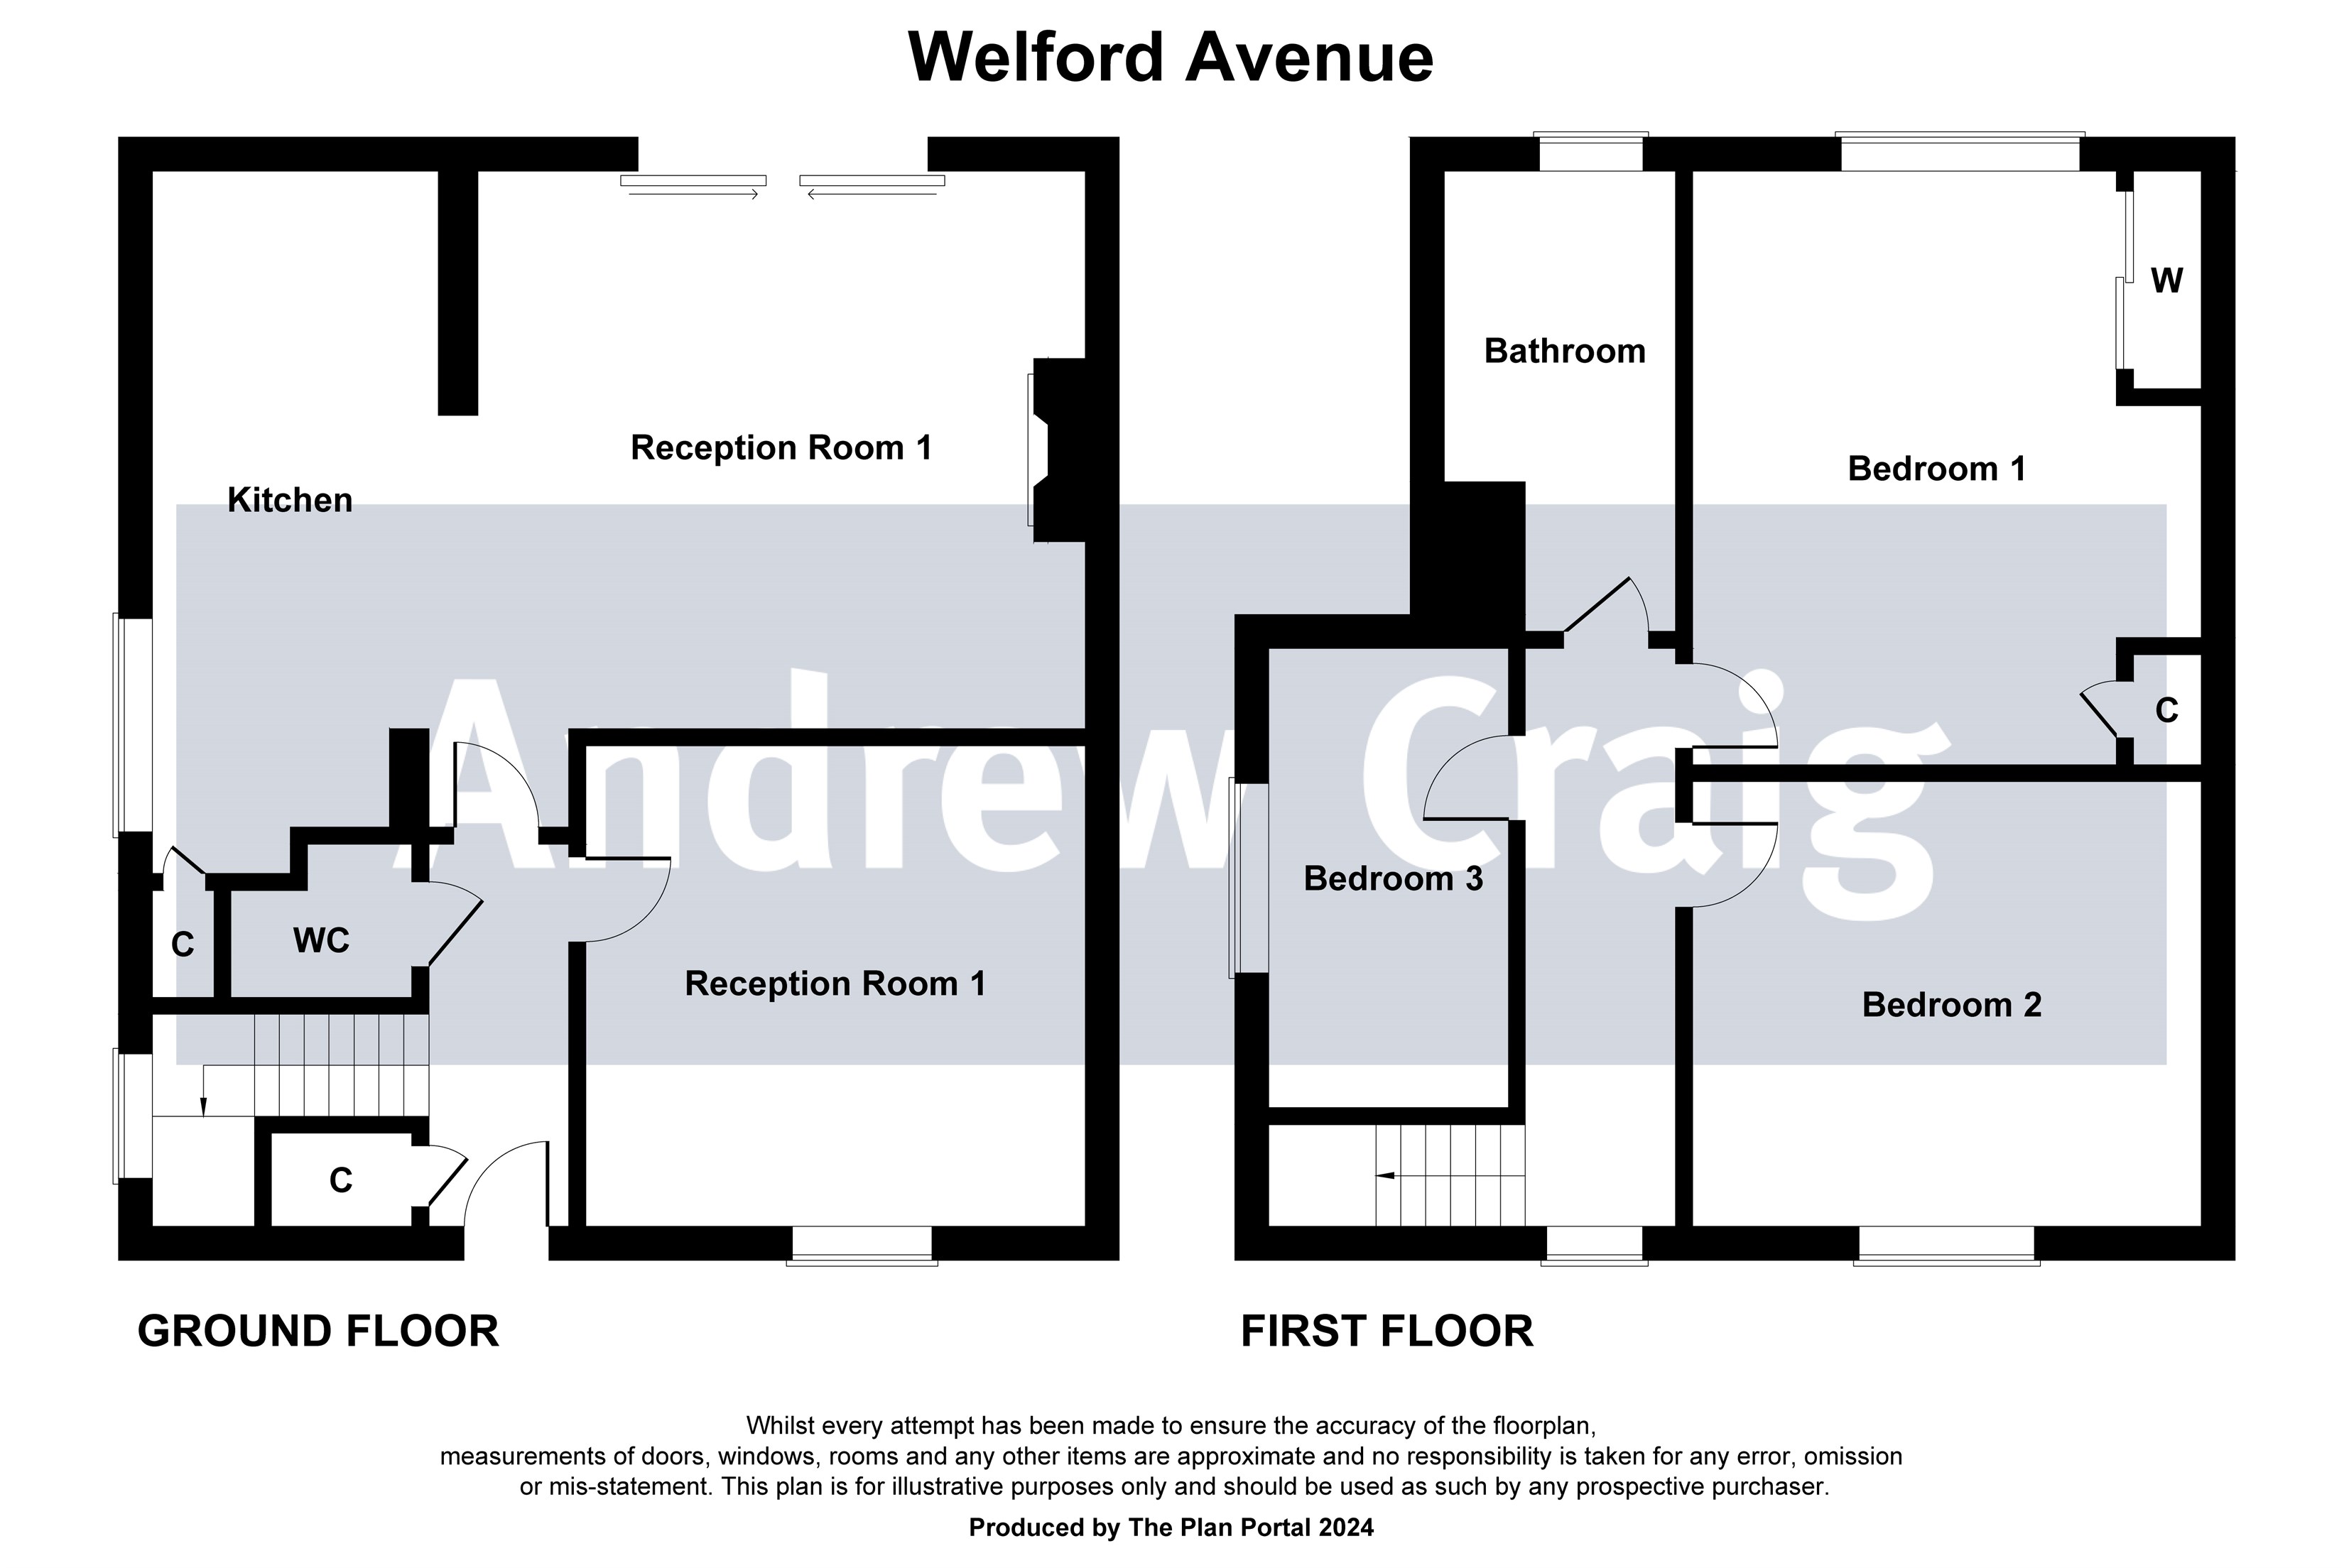 3 bed semi-detached house for sale in Welford Avenue, Gosforth - Property floorplan